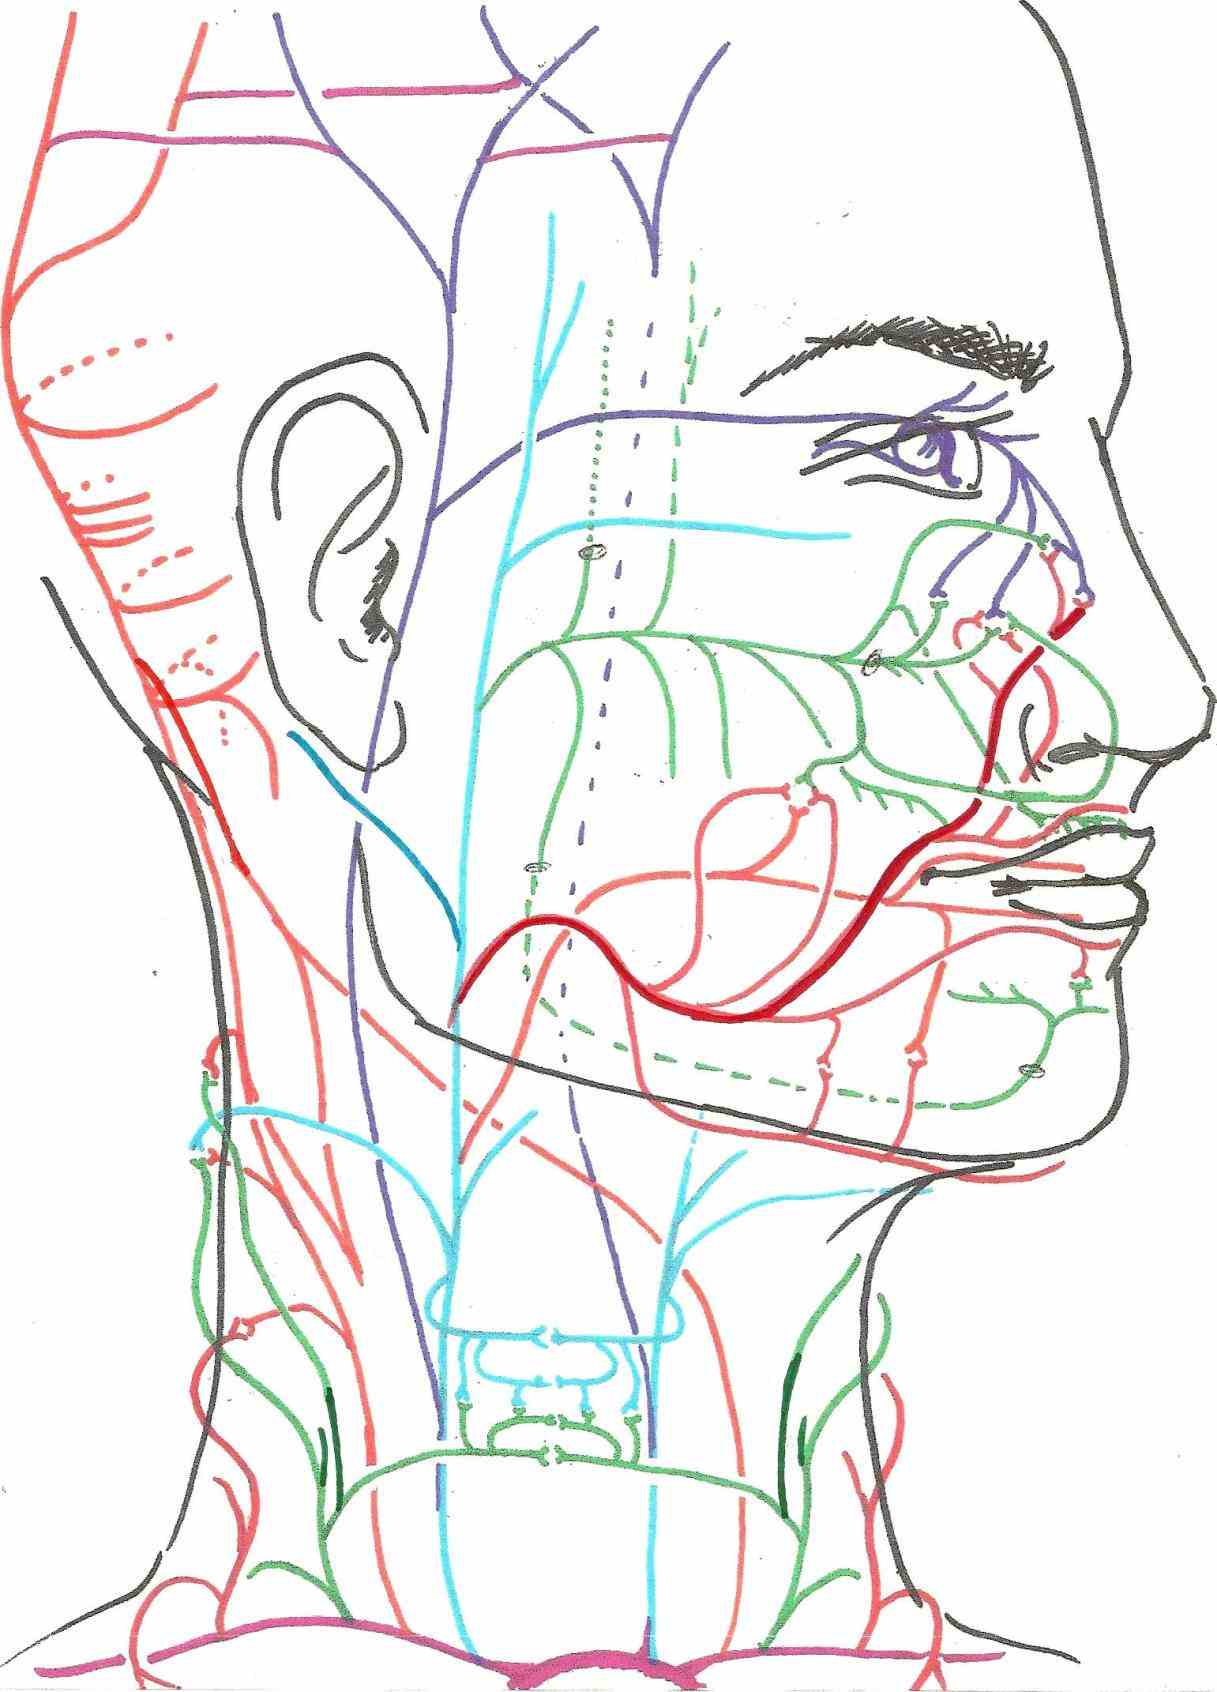 Head And Neck Muscle Diagram : muscles of the face & neck, unlabeled